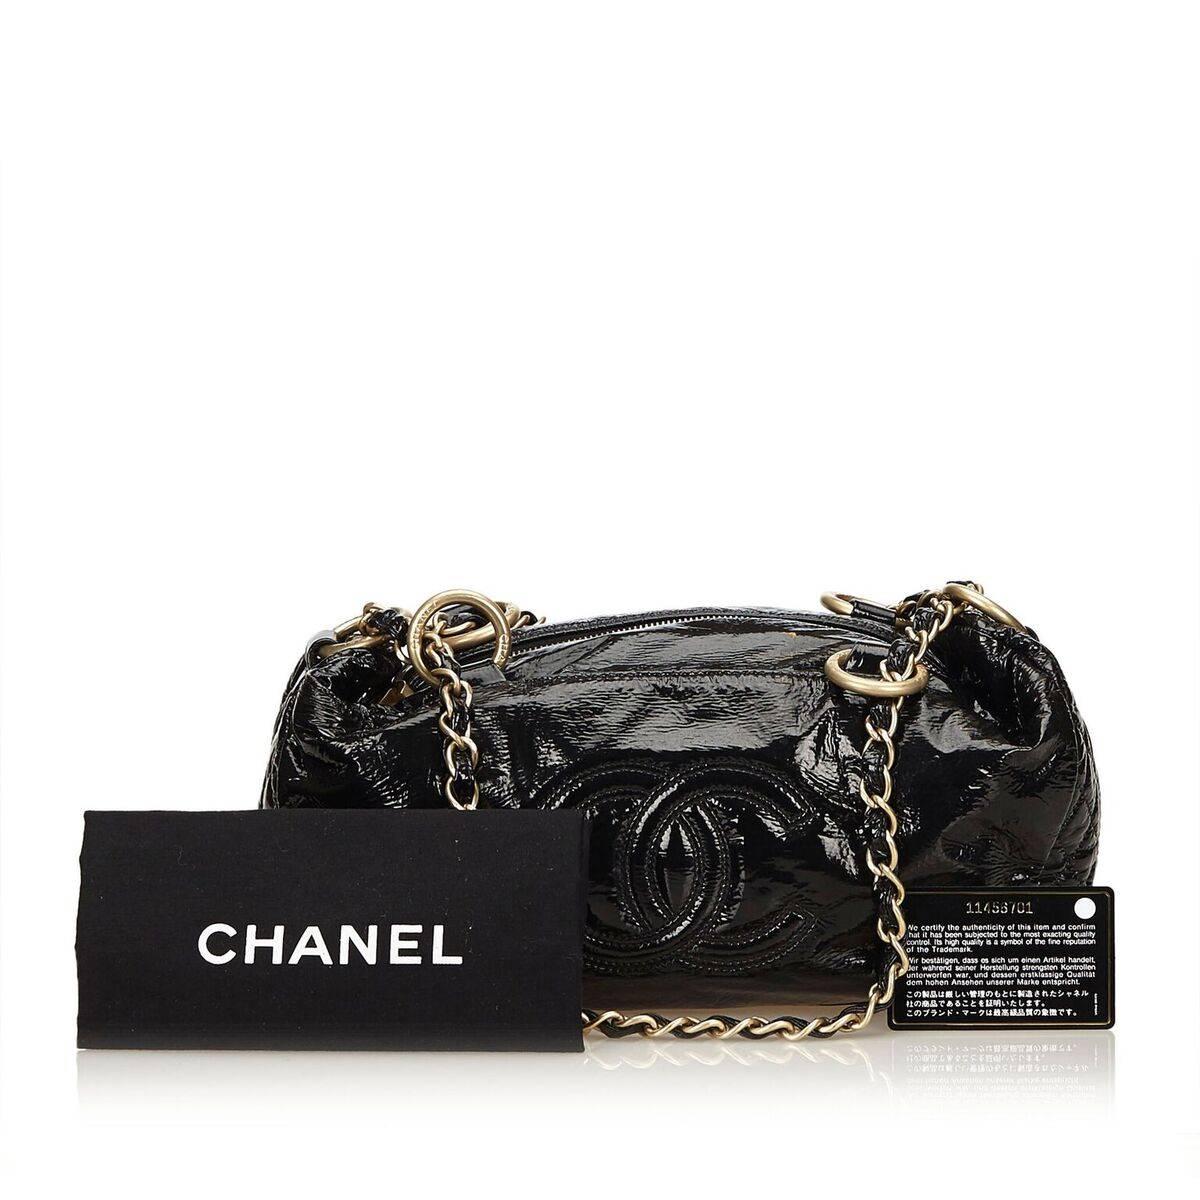 Product details:  Black patent leather shoulder bag by Chanel.  Dual chain shoulder straps.  Top zip closure.  Lined interior with inner zip and slide pockets.  Goldtone hardware.  Authenticity card and dust bag included.  14